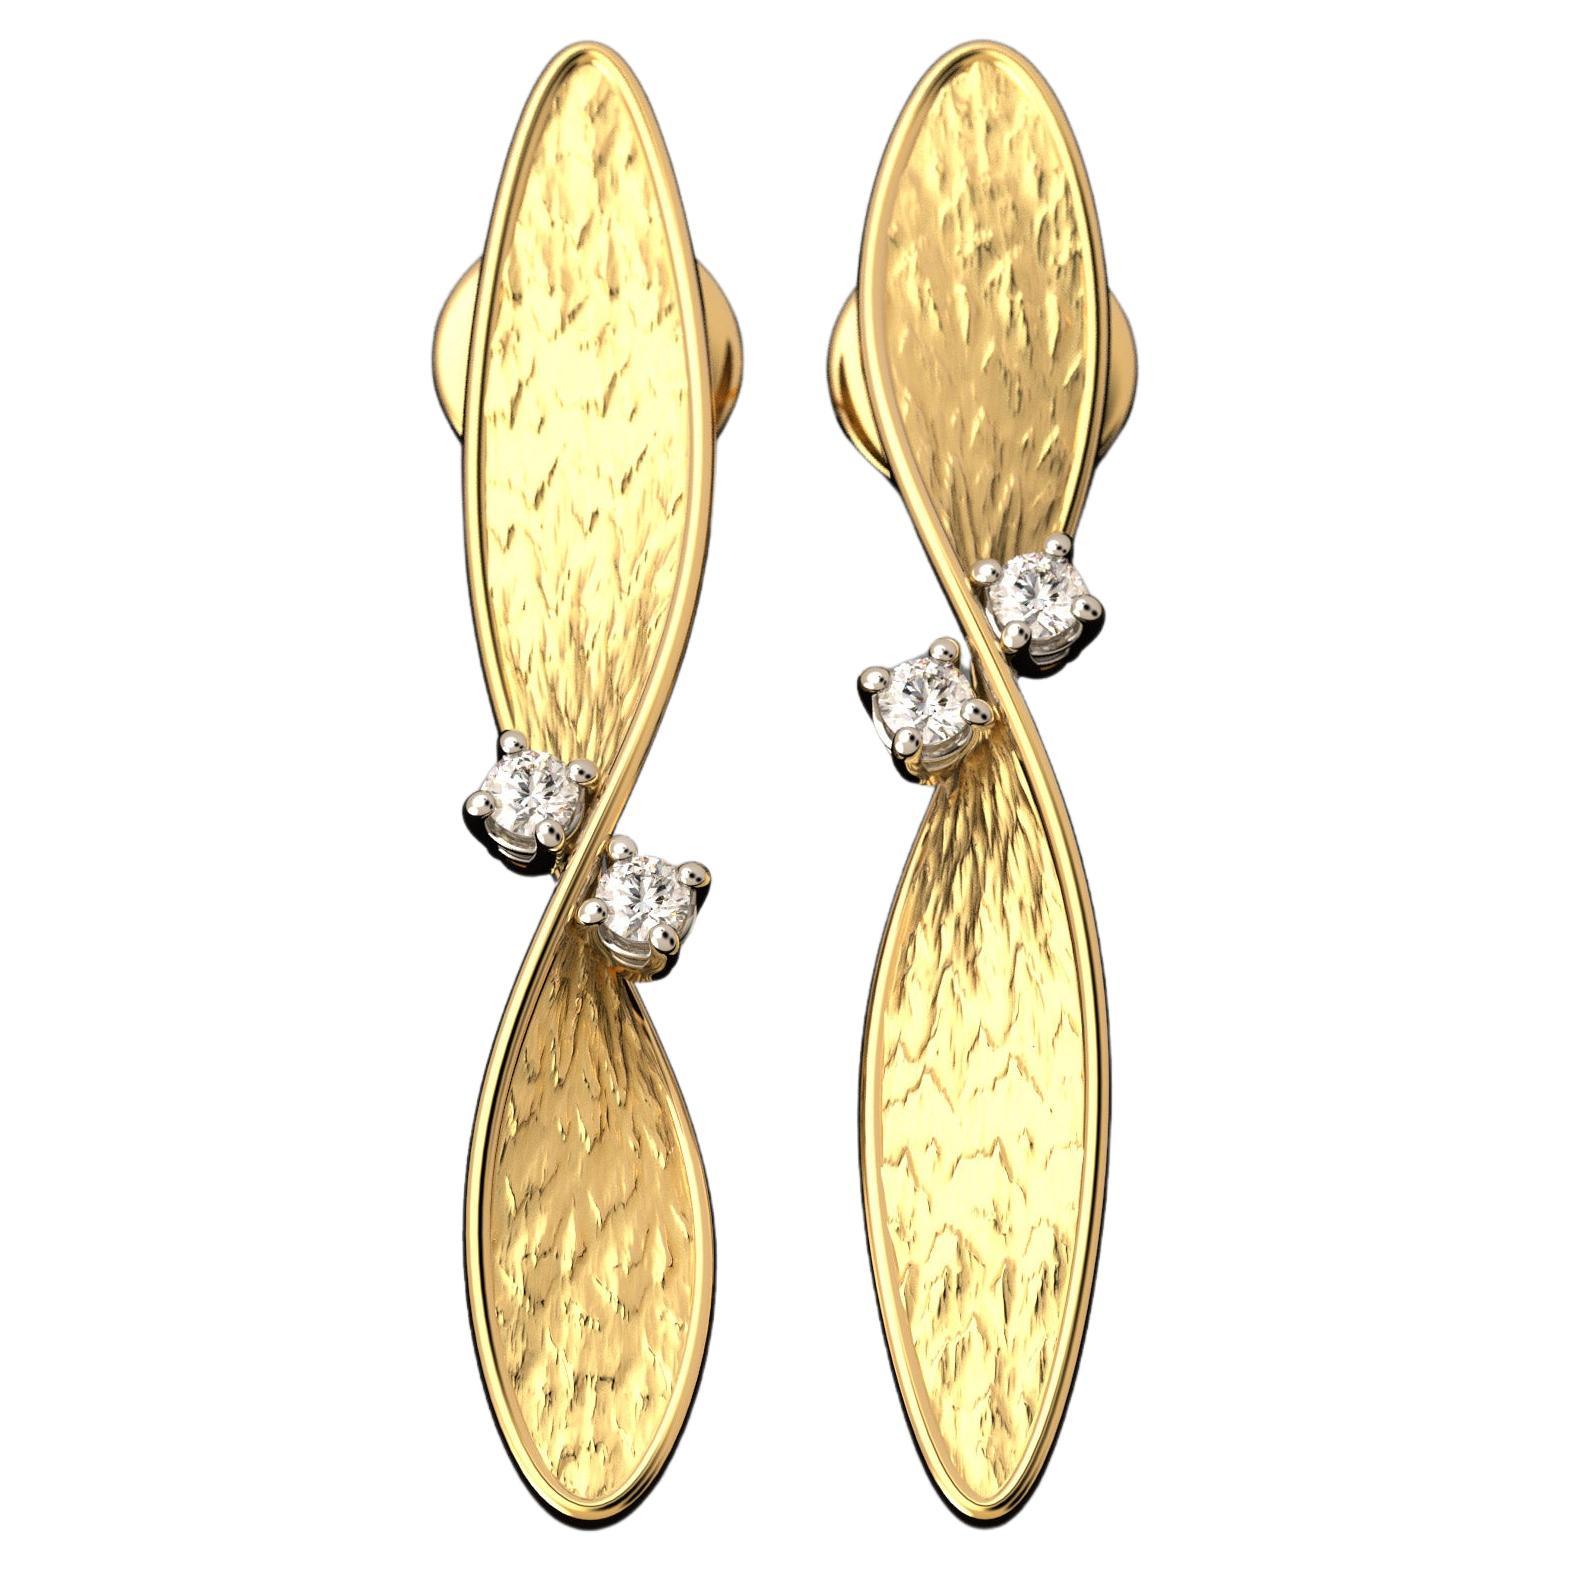 18k Gold Diamond Earrings made in Italy by Oltremare Gioielli, Italian Jewelry.